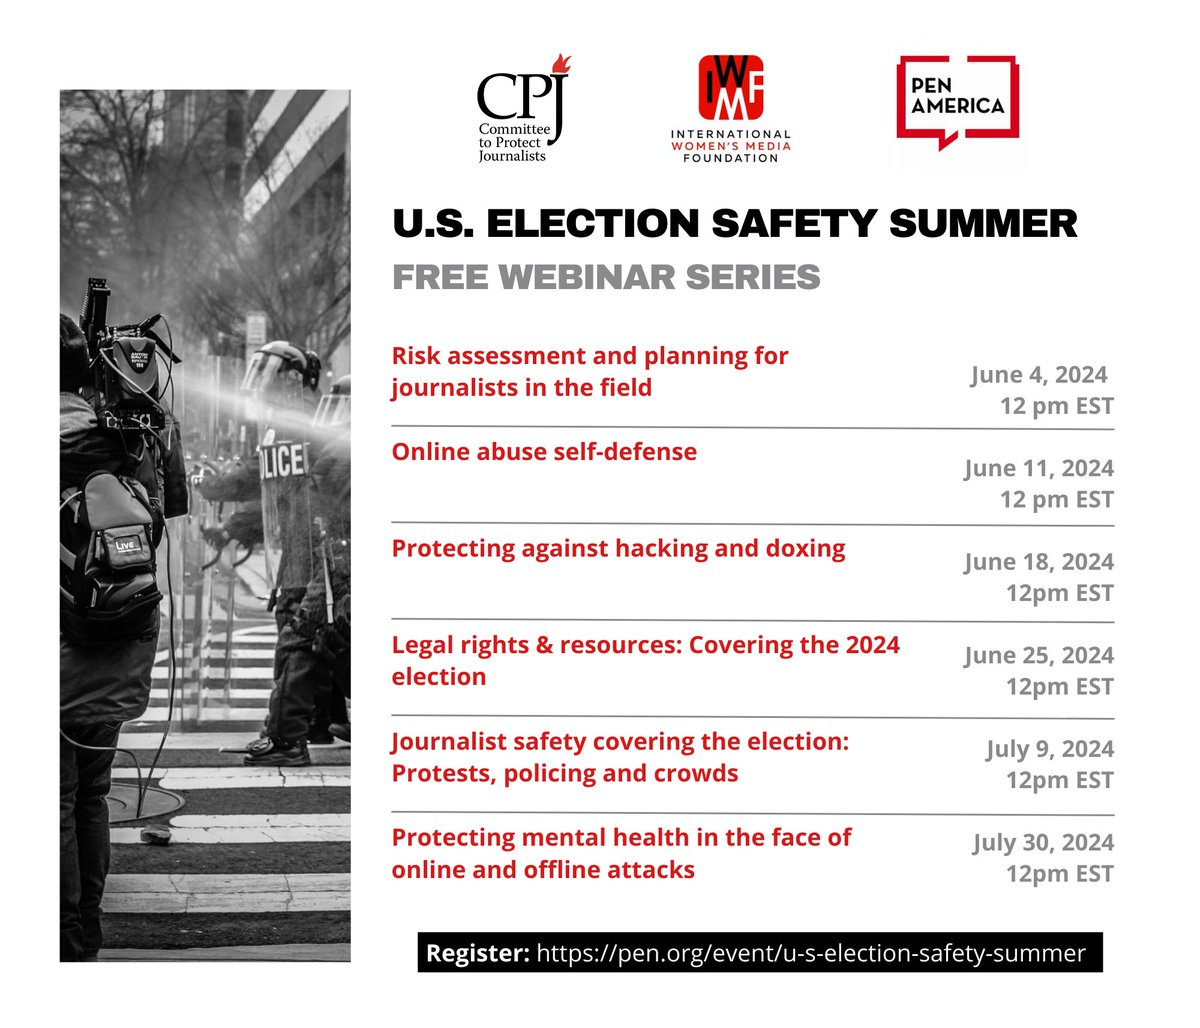 Are you a journalist covering the U.S. election? To learn how to protect yourself and others, tune into “U.S. Election Safety Summer,” a free webinar series from @PENamerica @pressfreedom & @IWMF. Select Tuesdays at 12pm ET this June & July. pen.org/event/u-s-elec…